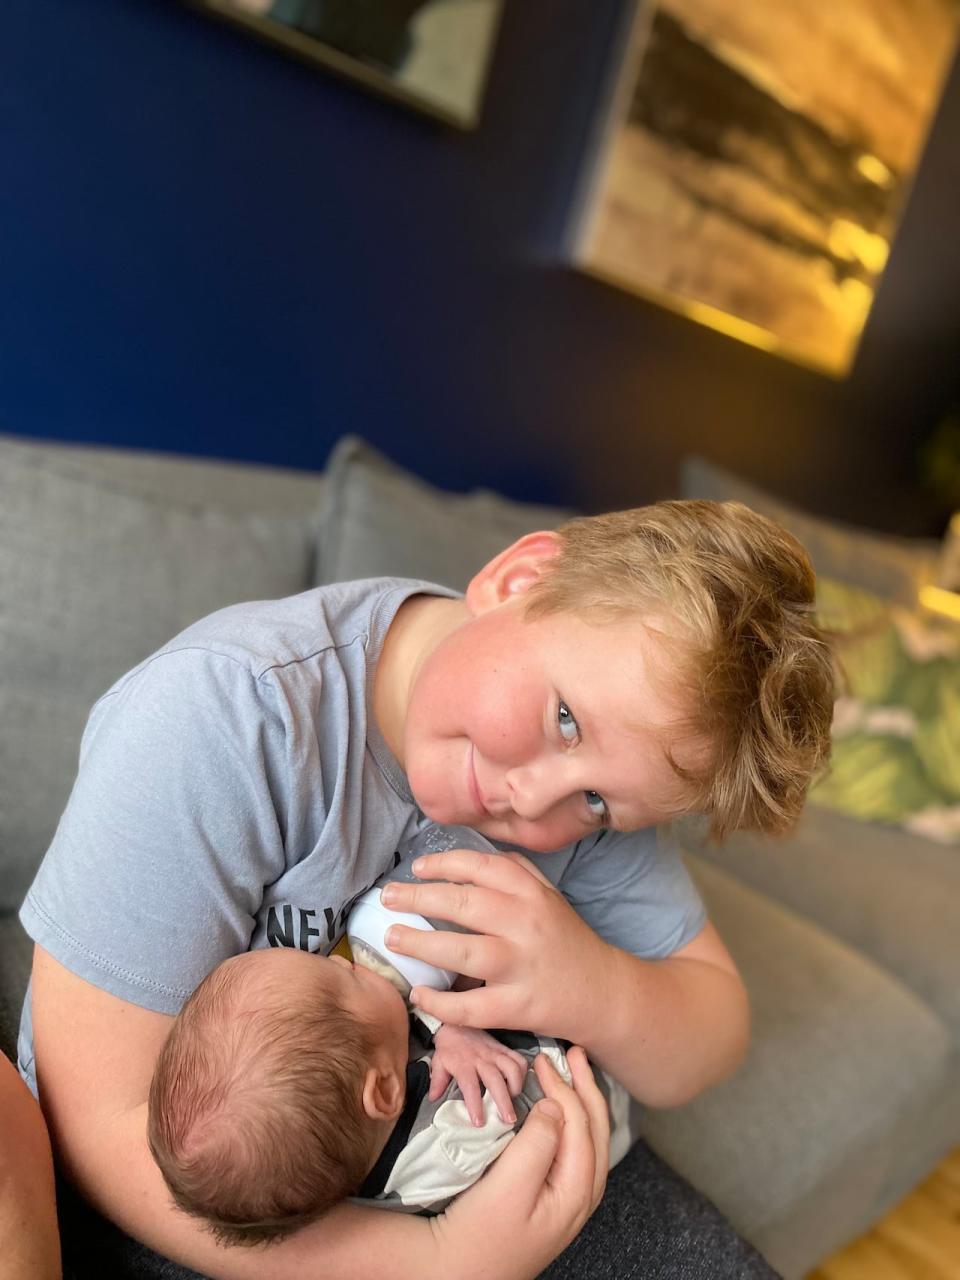 Meagan Edwards says the cost of formula has gone up dramatically since her now seven-year-old son Callum was a baby. Callum is seen here feeding his little sister Cecelia.